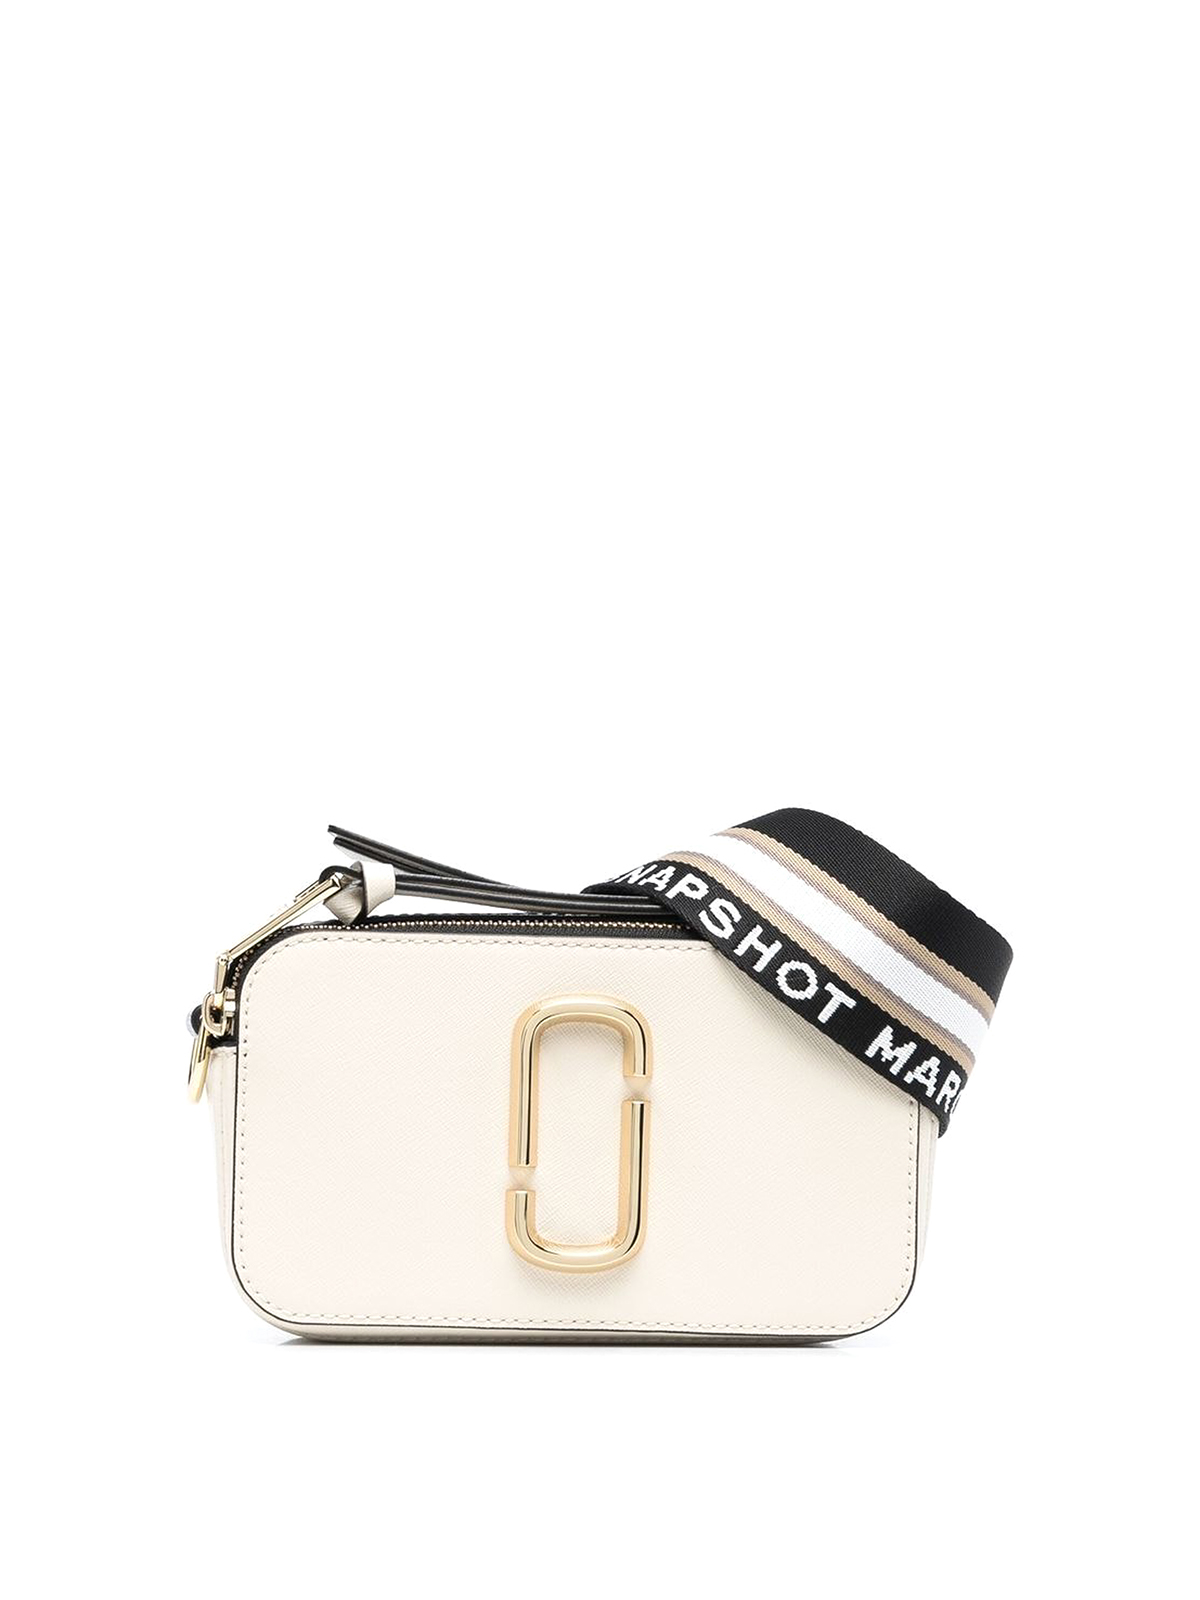 The Perfect Crossbody Bag For All Seasons: Marc Jacobs Snapshot